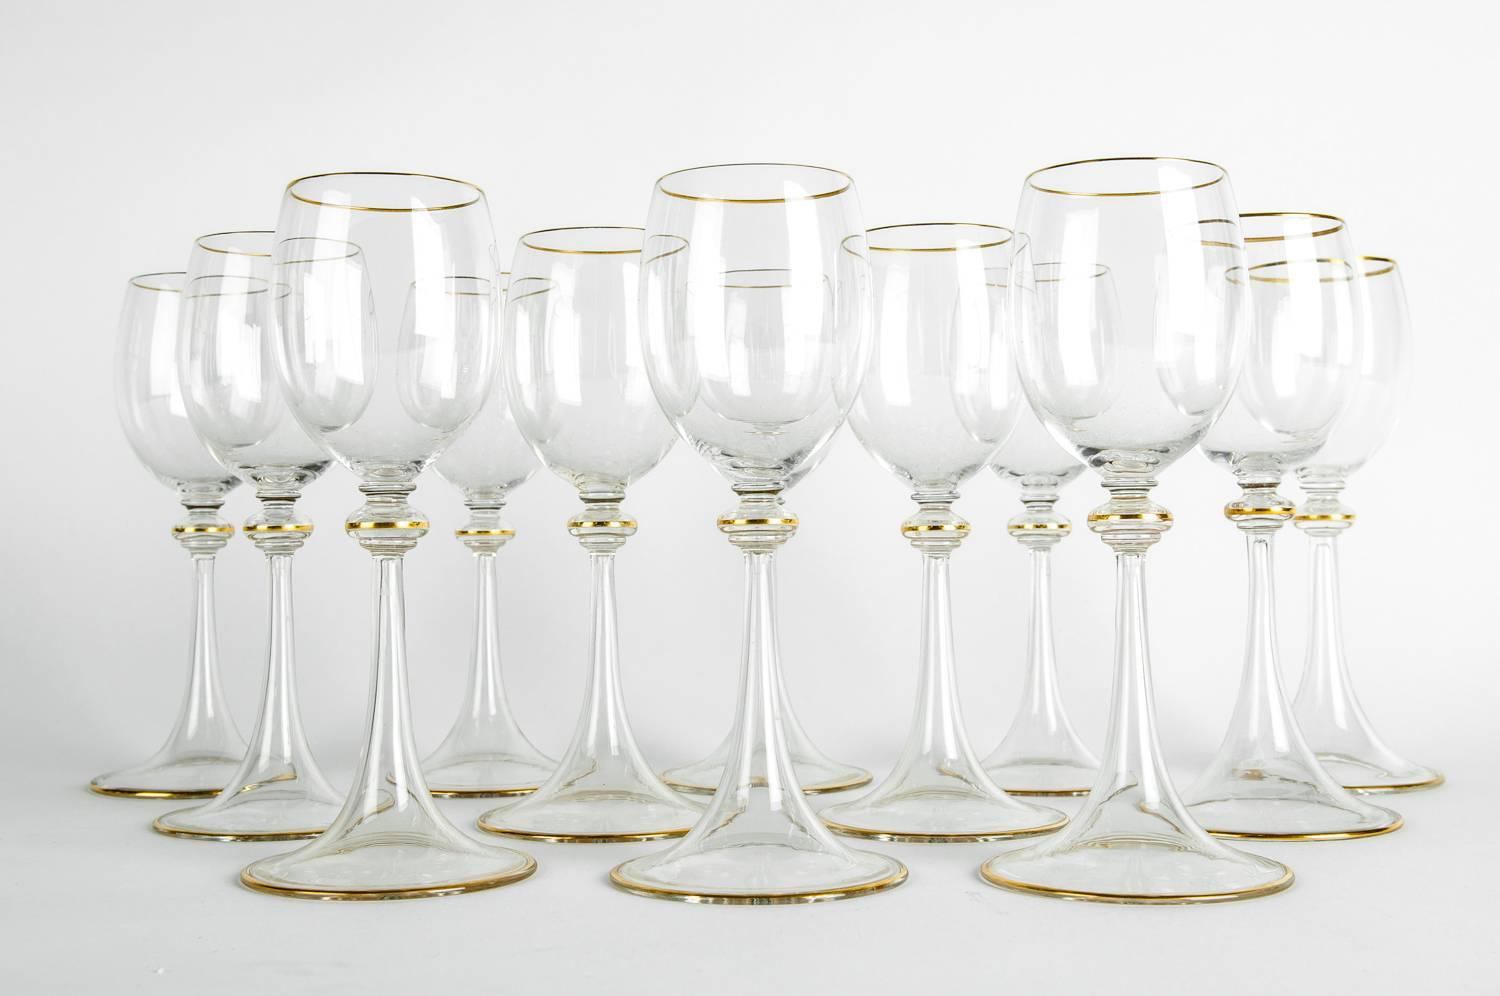 Vintage Baccarat crystal wine / water barware / tableware service for 11 people. Baccarat etched stamped undersigned . Each glass is in great vintage condition. Minor wear consistent with age / use . Each glass measure about 7.3 inches high x 3